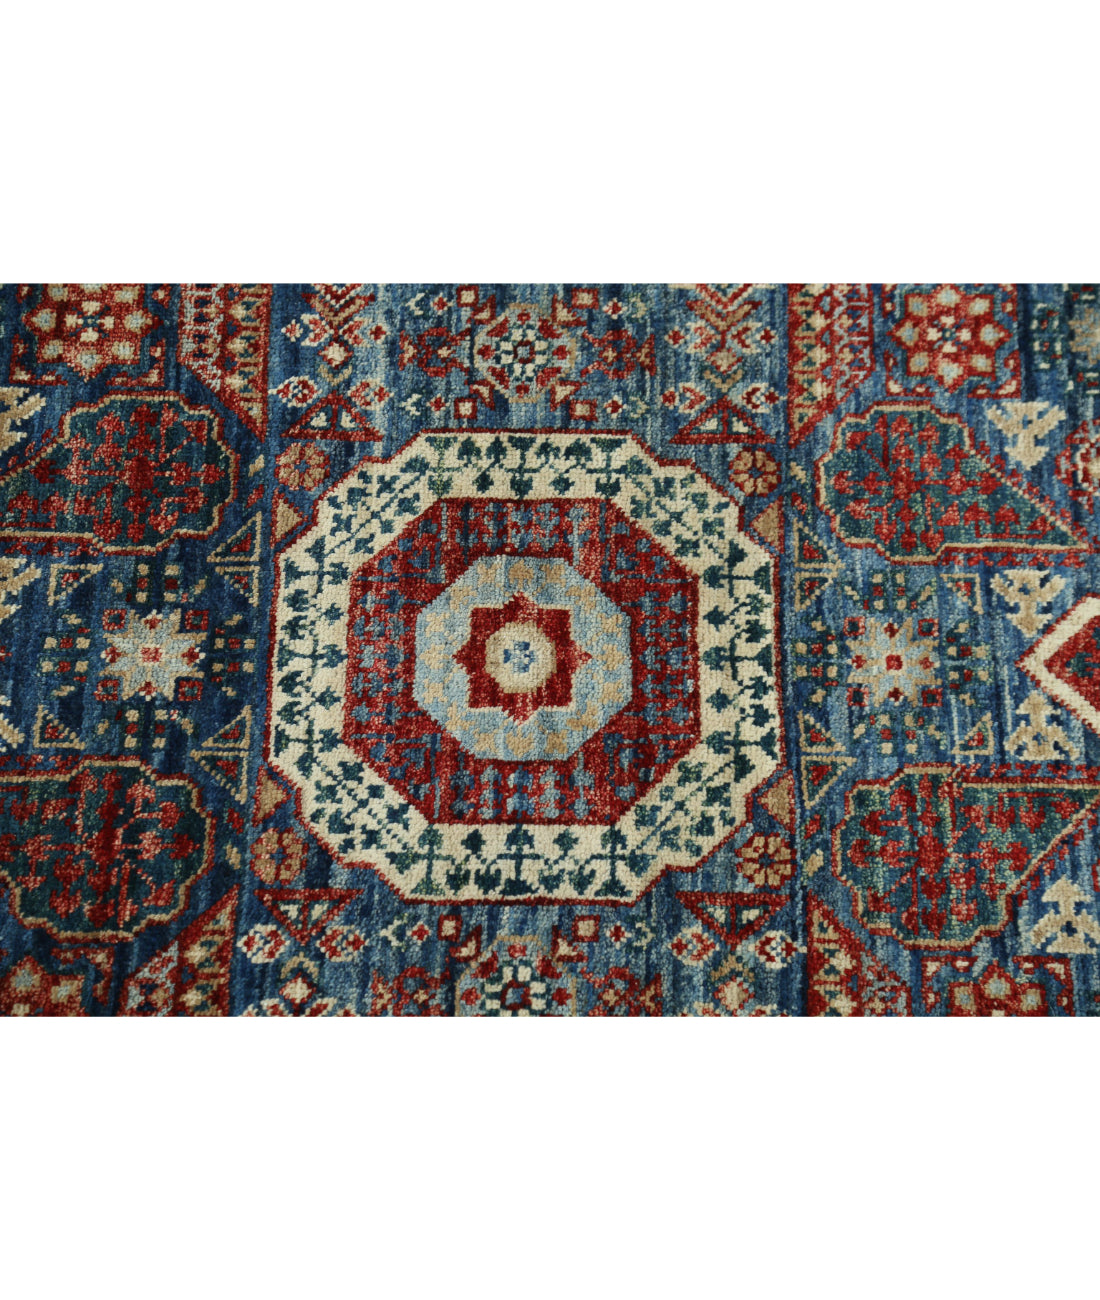 Hand Knotted Mamluk Wool Rug - 2'5'' x 11'7'' 2'5'' x 11'7'' (73 X 348) / Blue / Red